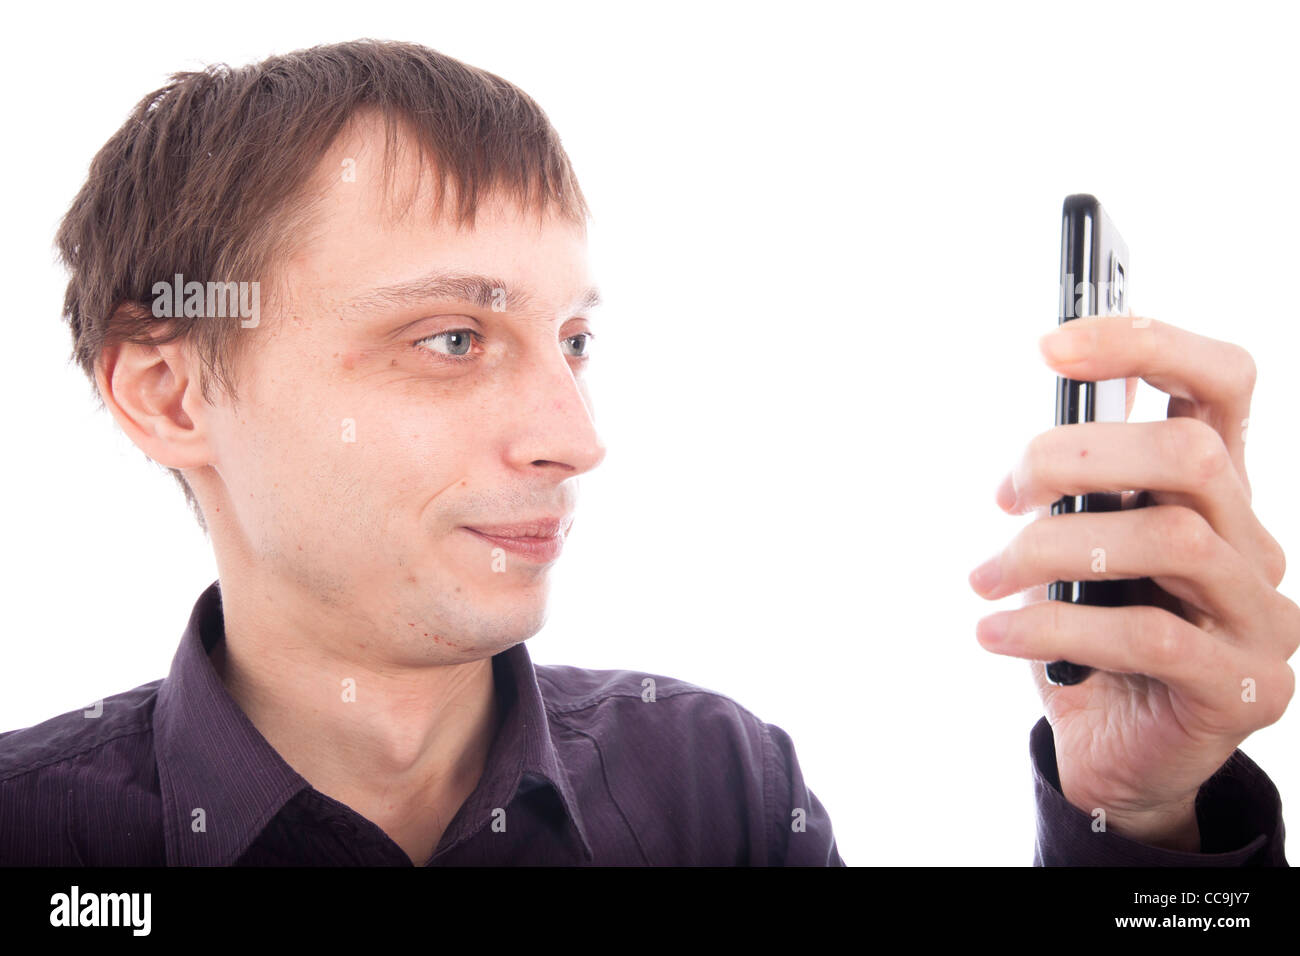 Weirdo man looking at cellphone, isolated on white background. Stock Photo